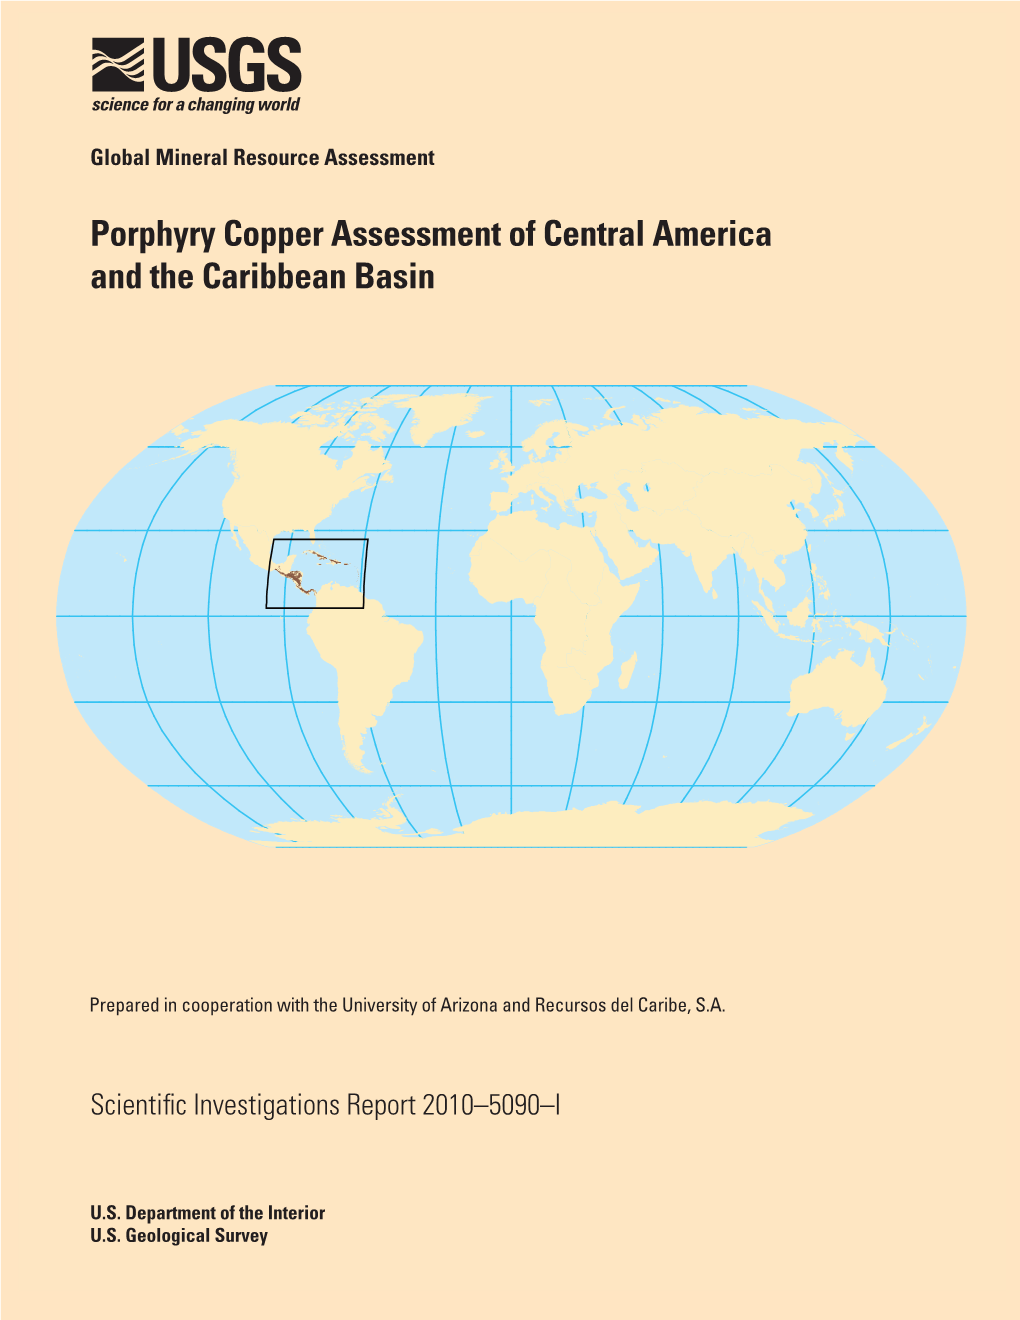 Porphyry Copper Assessment of Central America and the Caribbean Basin